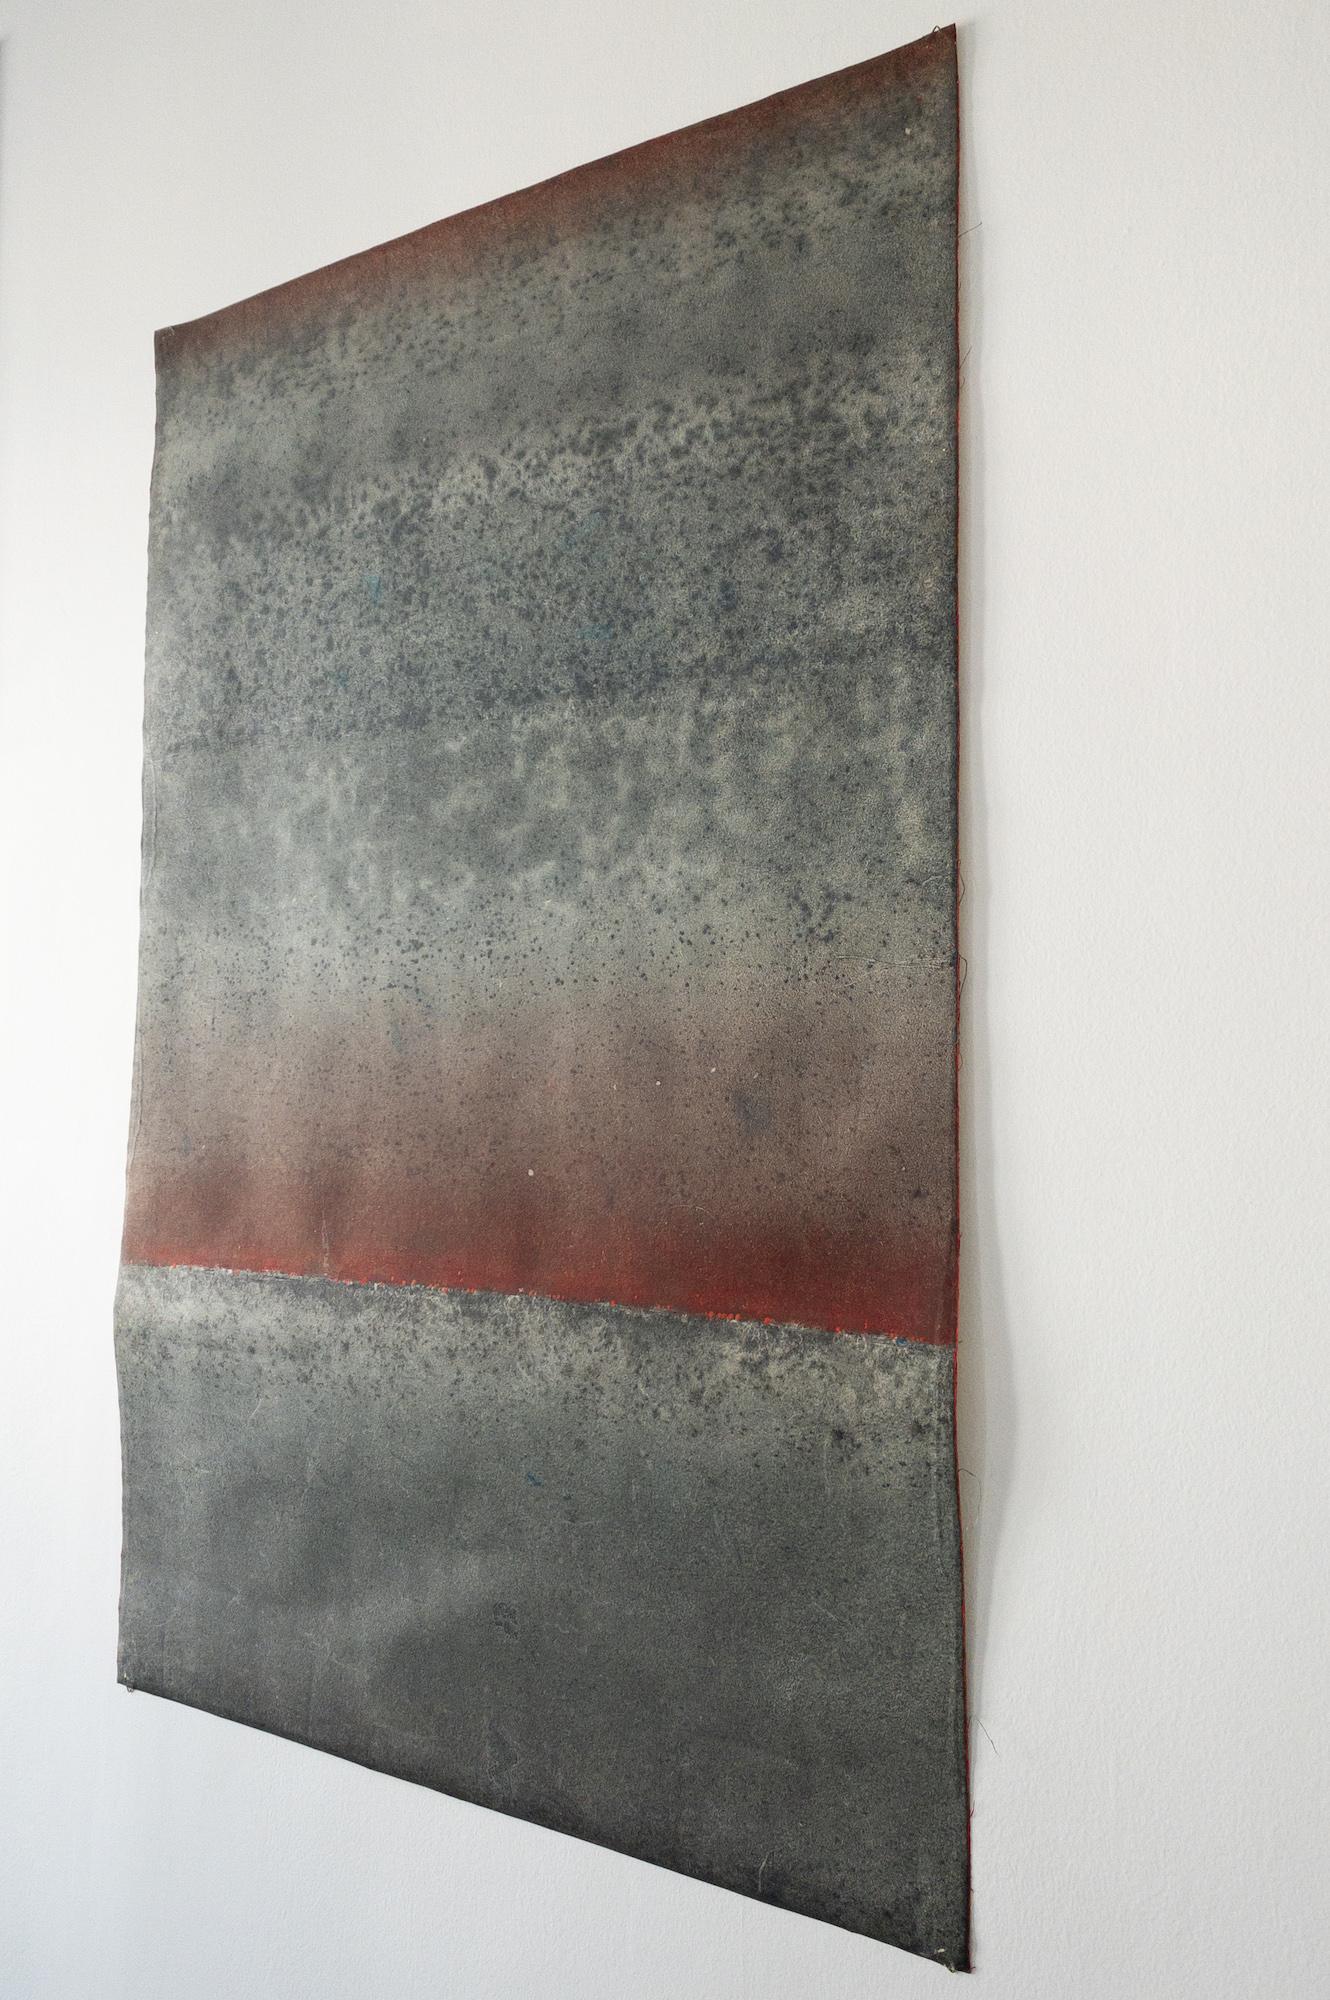 Untitled VI by Ferle - Abstract painting, lines, red and grey tones, spiritual For Sale 1